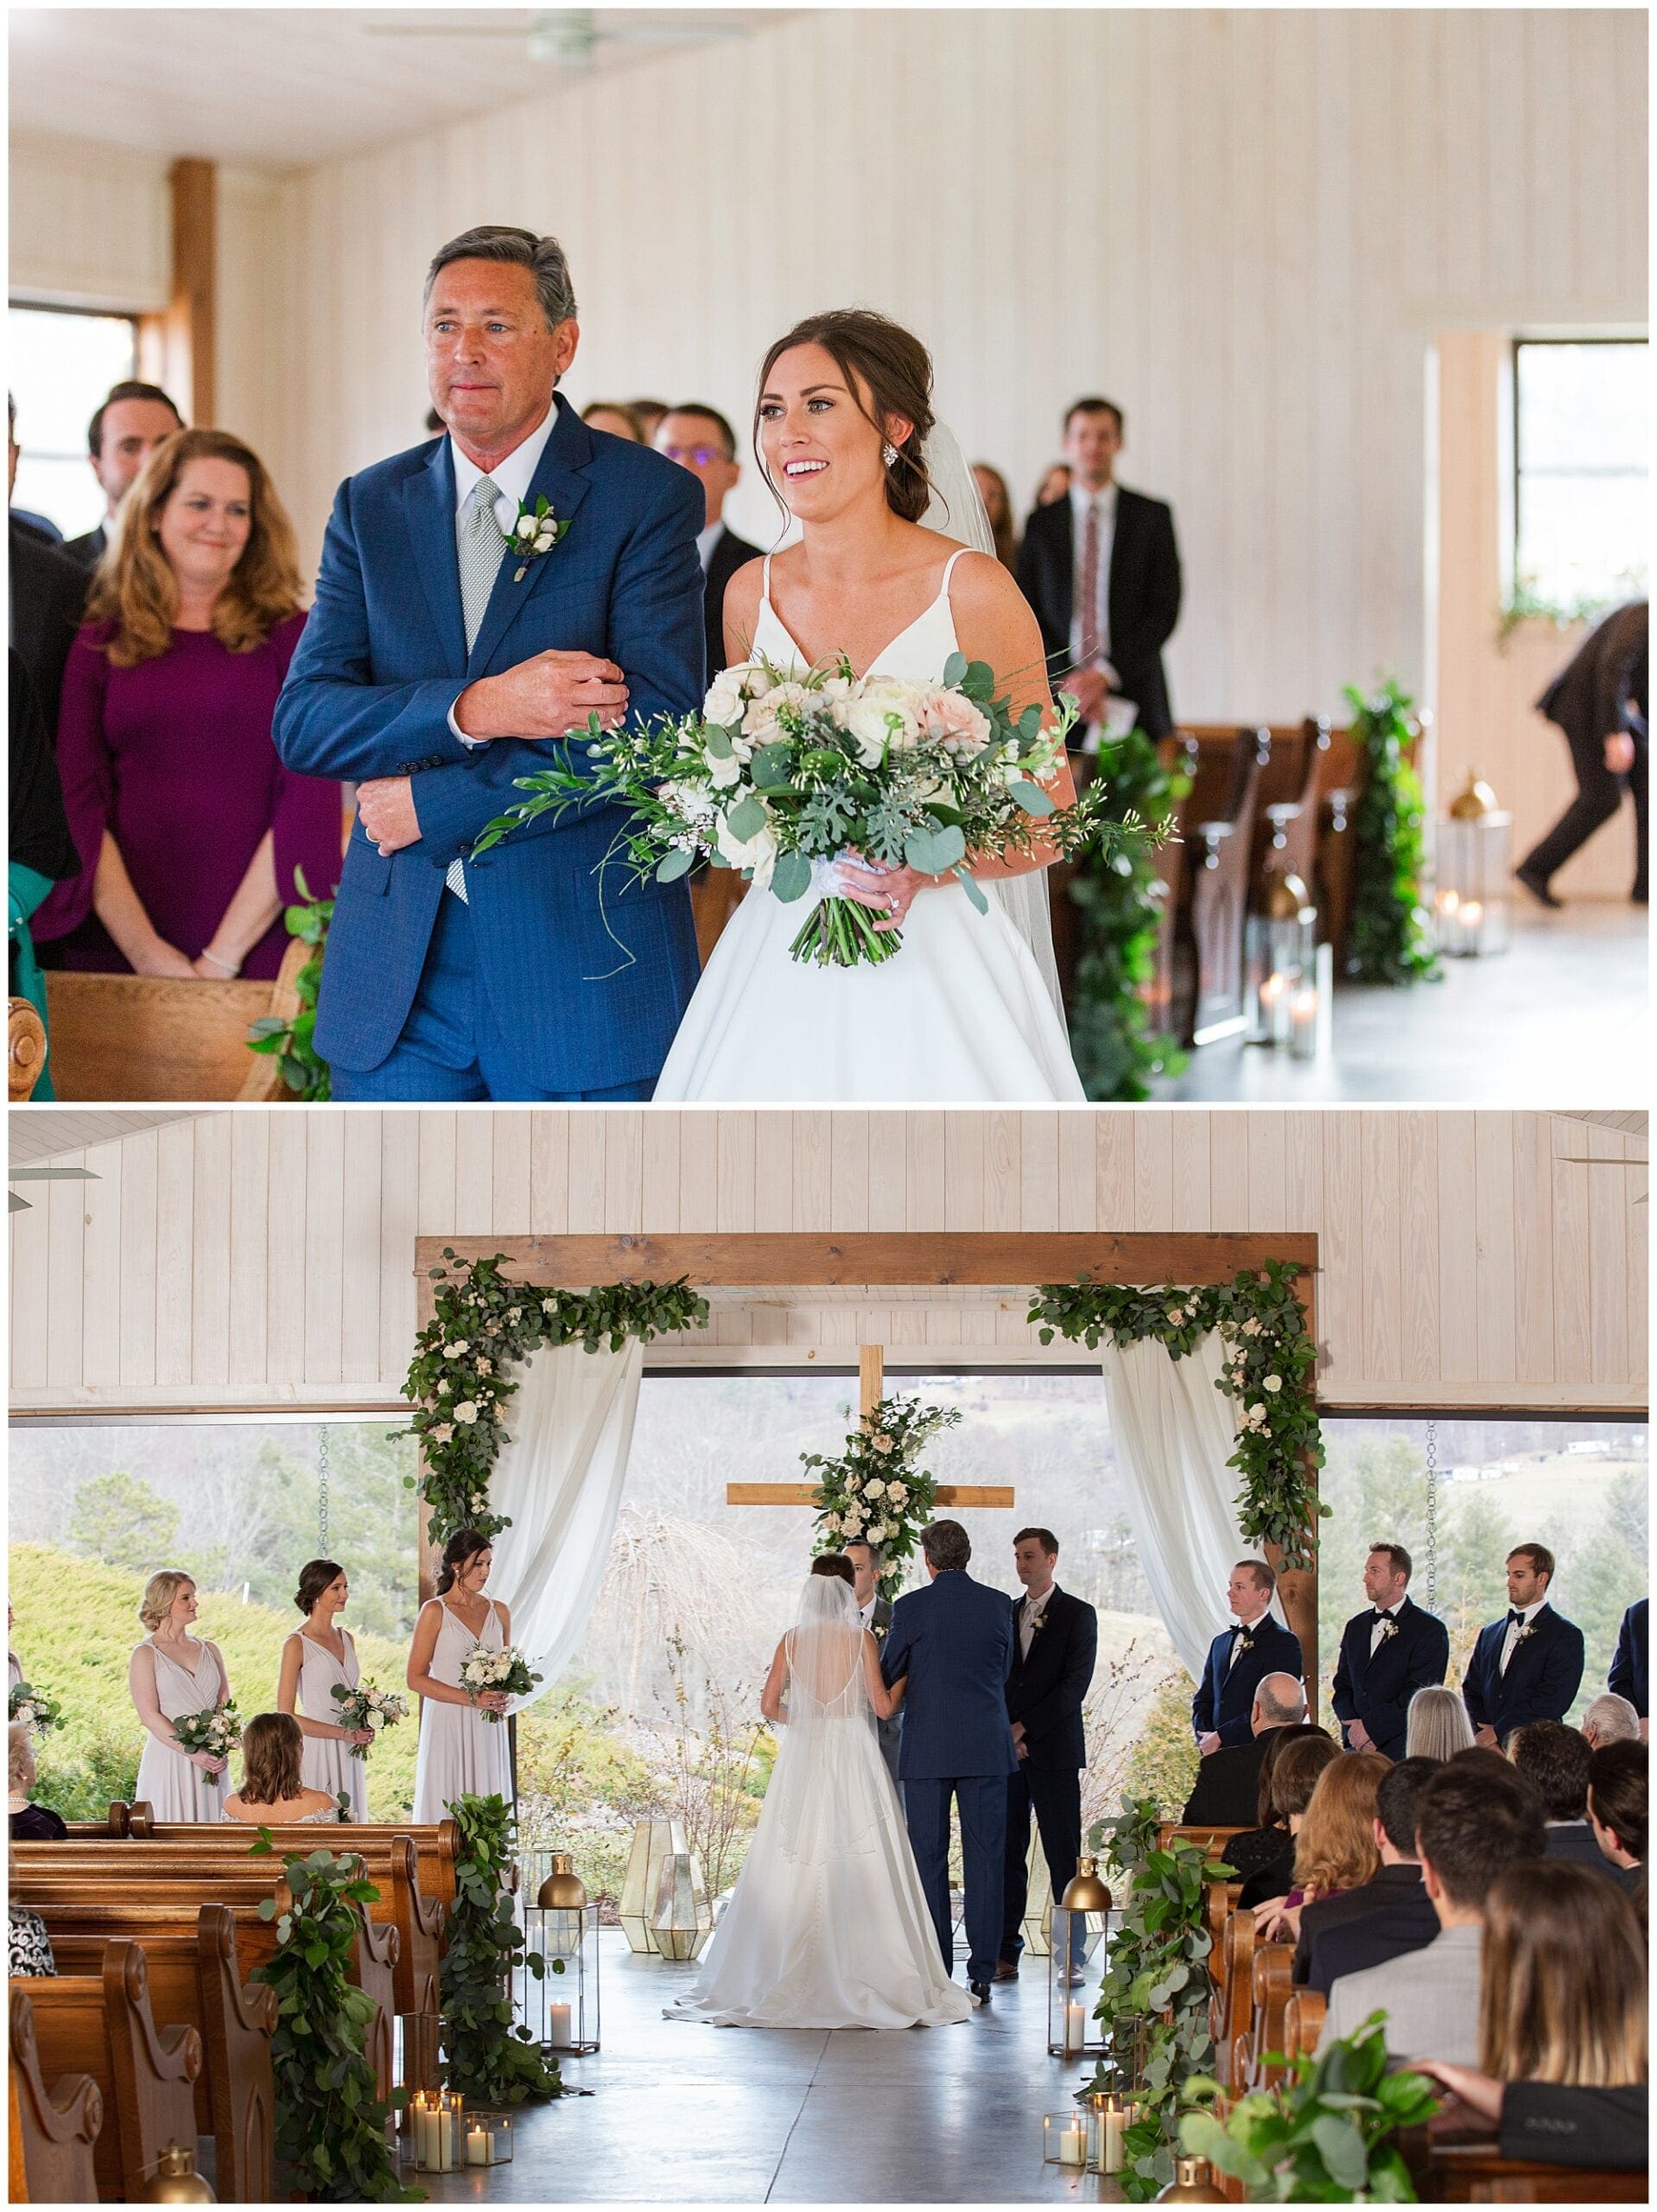 Father walks bride down the aisle- Kathy Beaver Photography